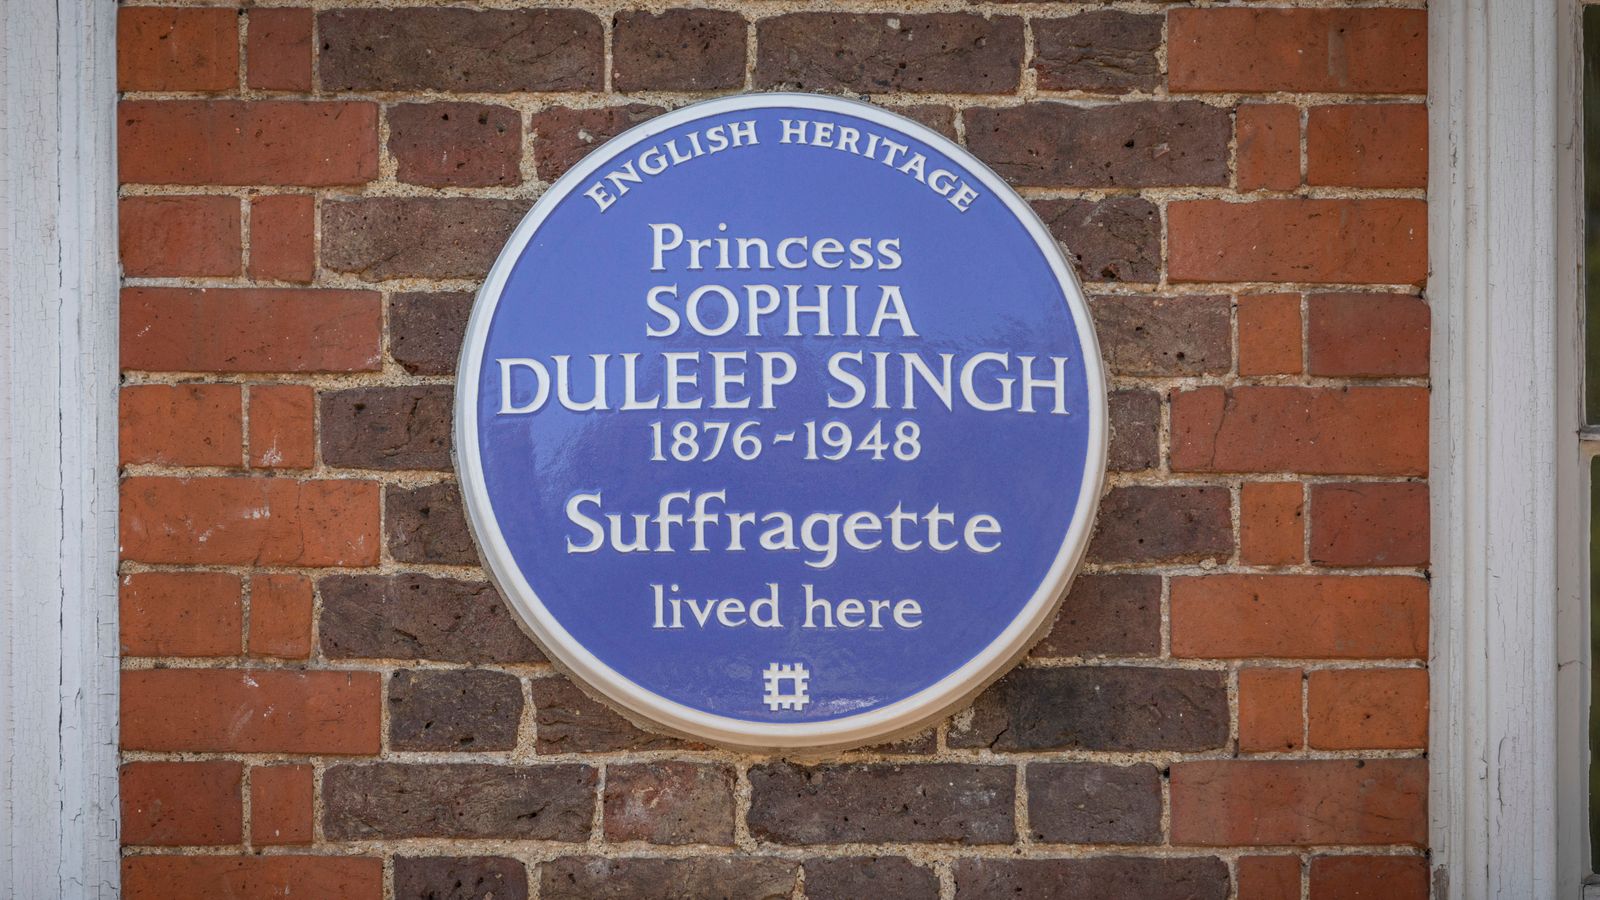 Sophia Duleep Singh: Suffragette Indian princess commemorated with blue plaque